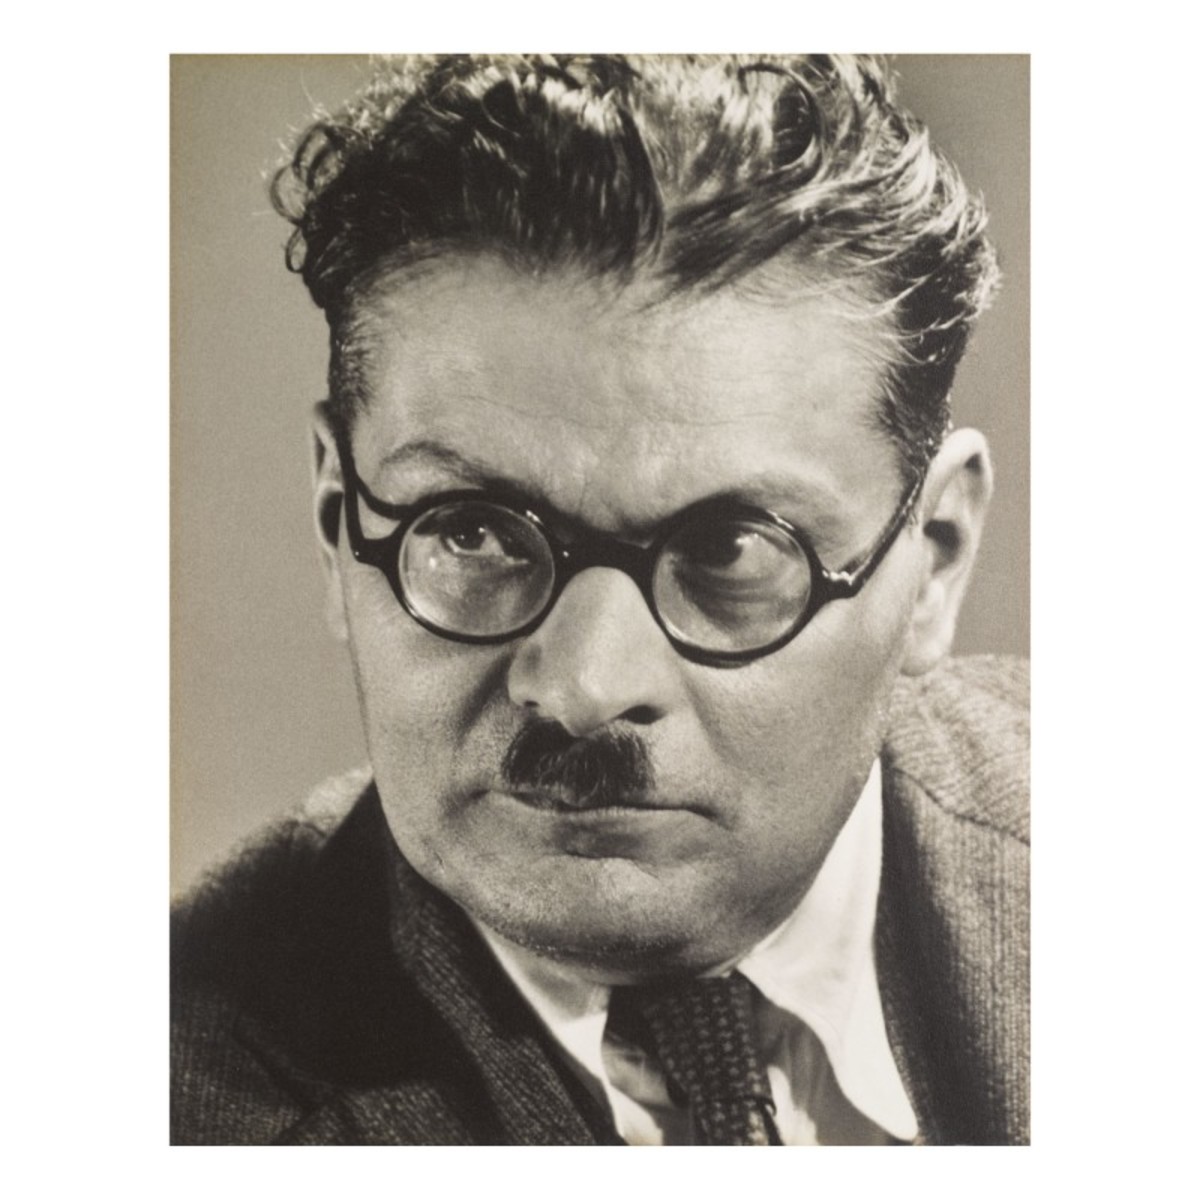 At an auction on April 4, Sotheby’s is offering this portrait, Jose Clemente Orozco, New York, taken by Abbott in 1935. Estimate: $7,000-$10,000. Orozco was a Mexican caricaturist and painter, who specialized in political murals. Abbott said of this photo: “Orozco was in New York in the 1930s for a meeting of the Artists’ Congress. I saw him and was impressed with the strength of his face and asked to take his portrait. I was living on Fifty-third Street, across from the Museum of Modern Art. He came by and sat for me; it was one of the few times I asked anyone to pose for me after I returned to New York.”